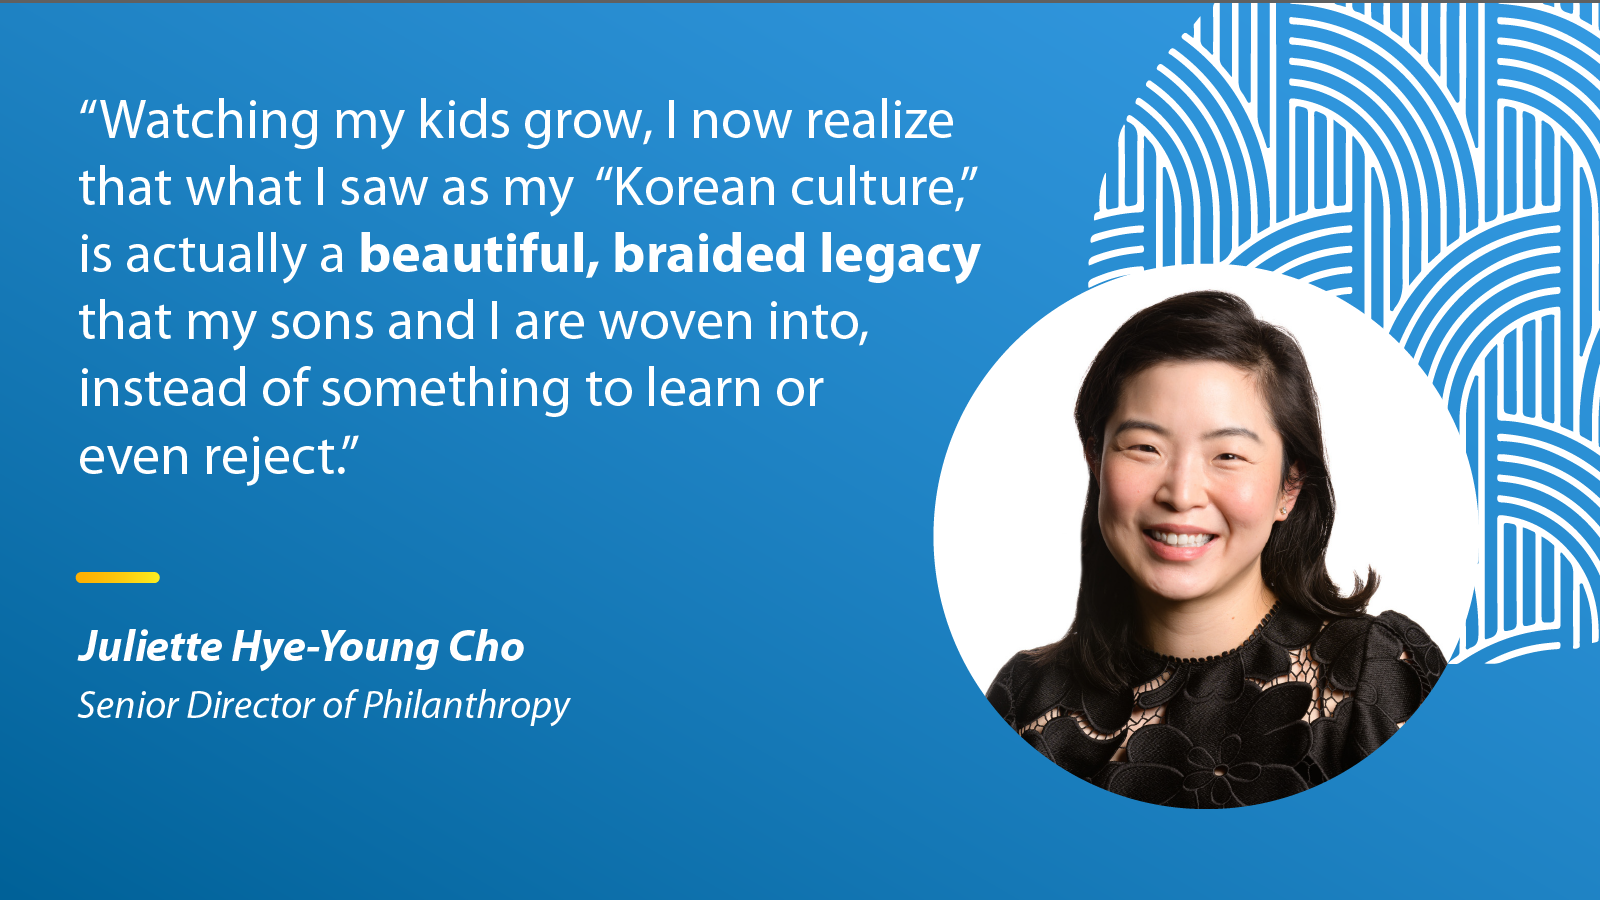 "Watching my kids grow, I now realize that what I saw as my 'Korean culture,' is actually a beautiful, braided legacy that my sons and I are woven into, instead of something to learn or even reject." - Juliette Hye-Young Cho, Senior Director of Philanthropy